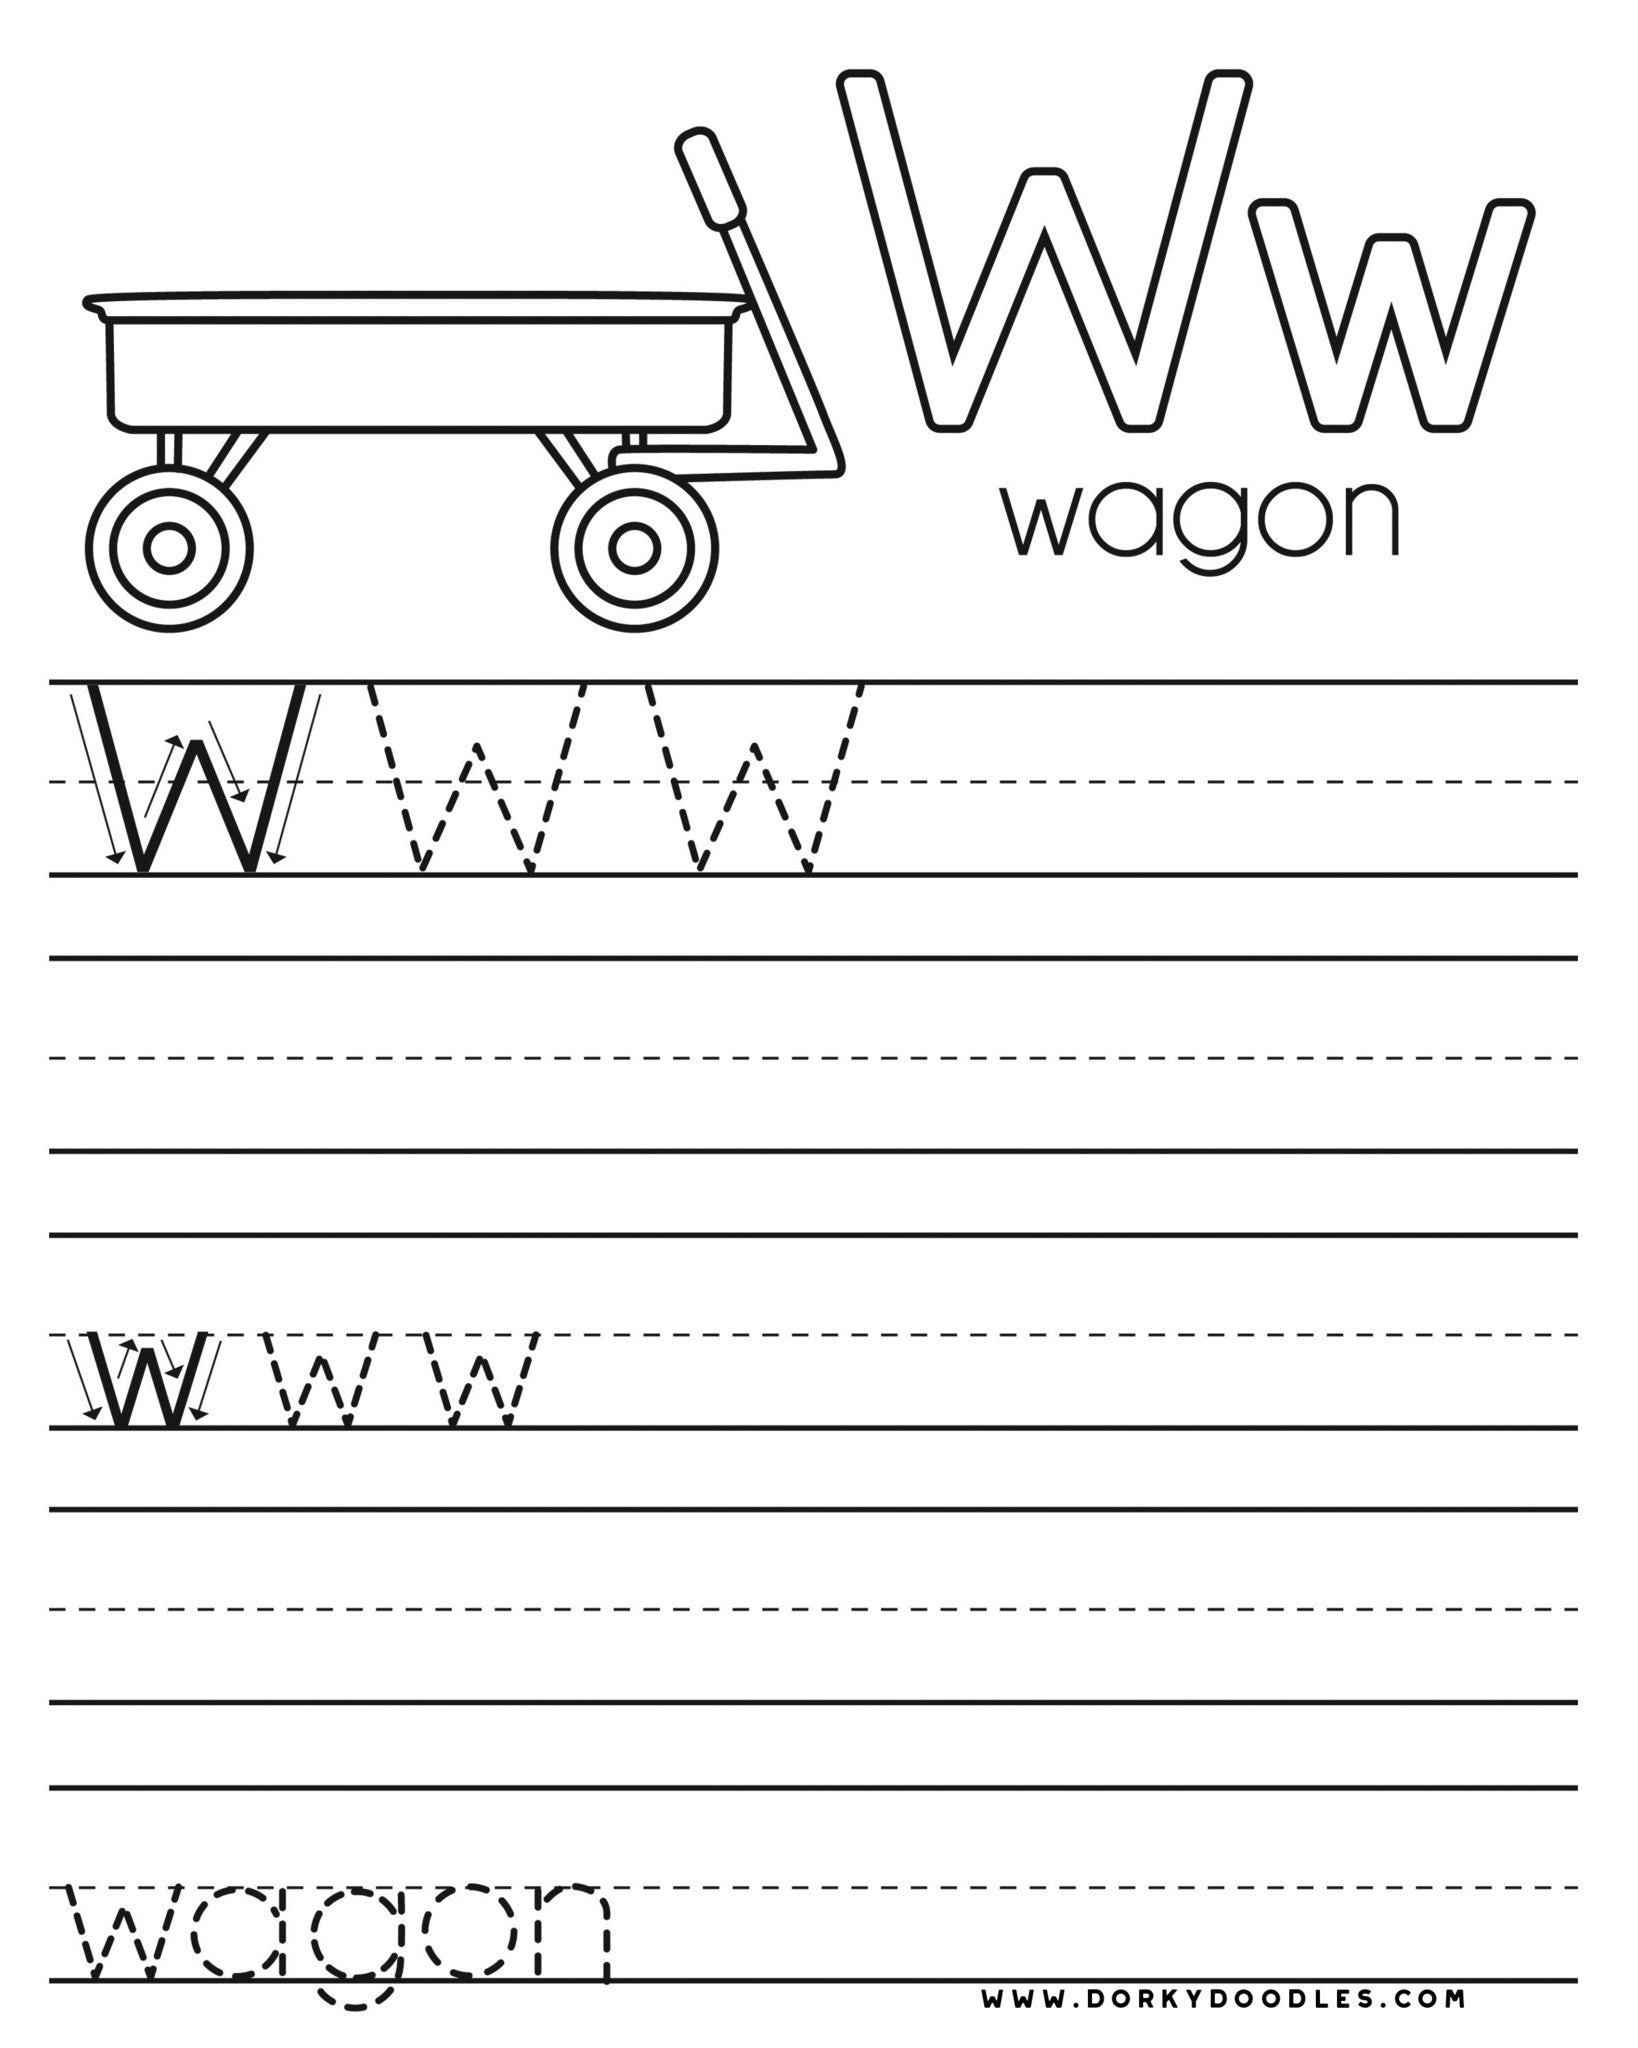 Letter w coloring page and writing practice â dorky doodles